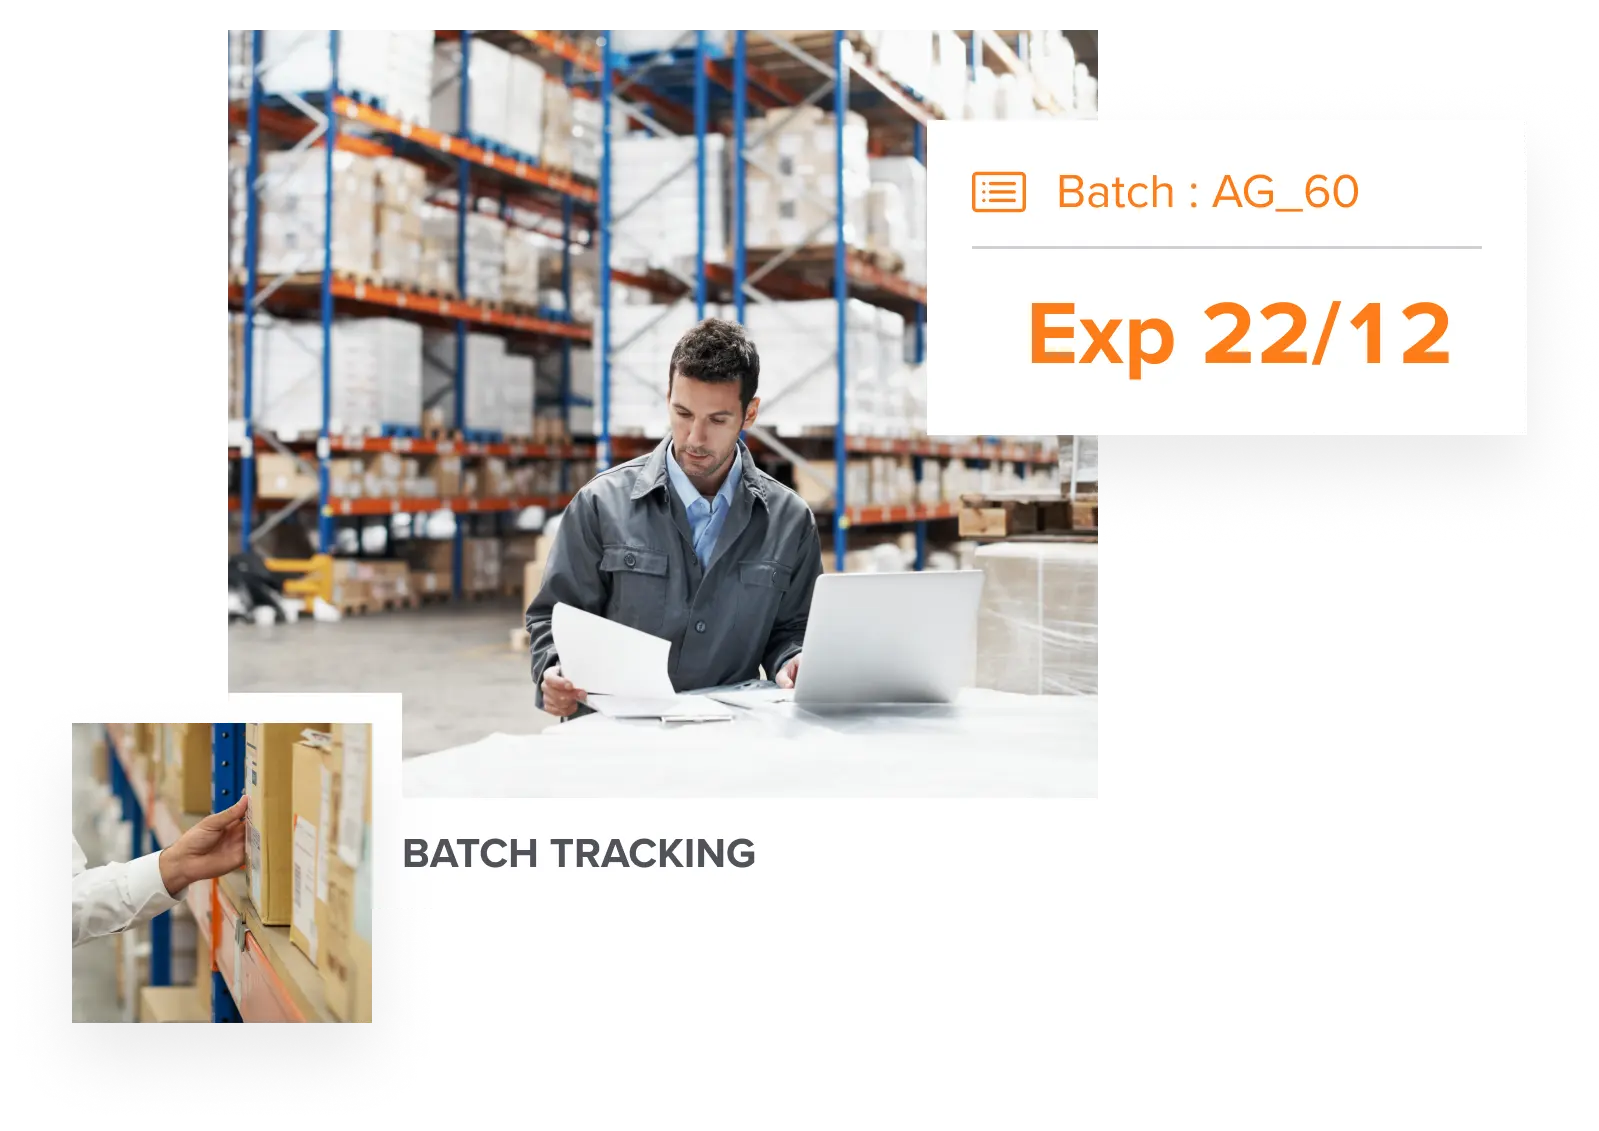 distributo-food-and-beverage-distribution-inventory-batch-tracking